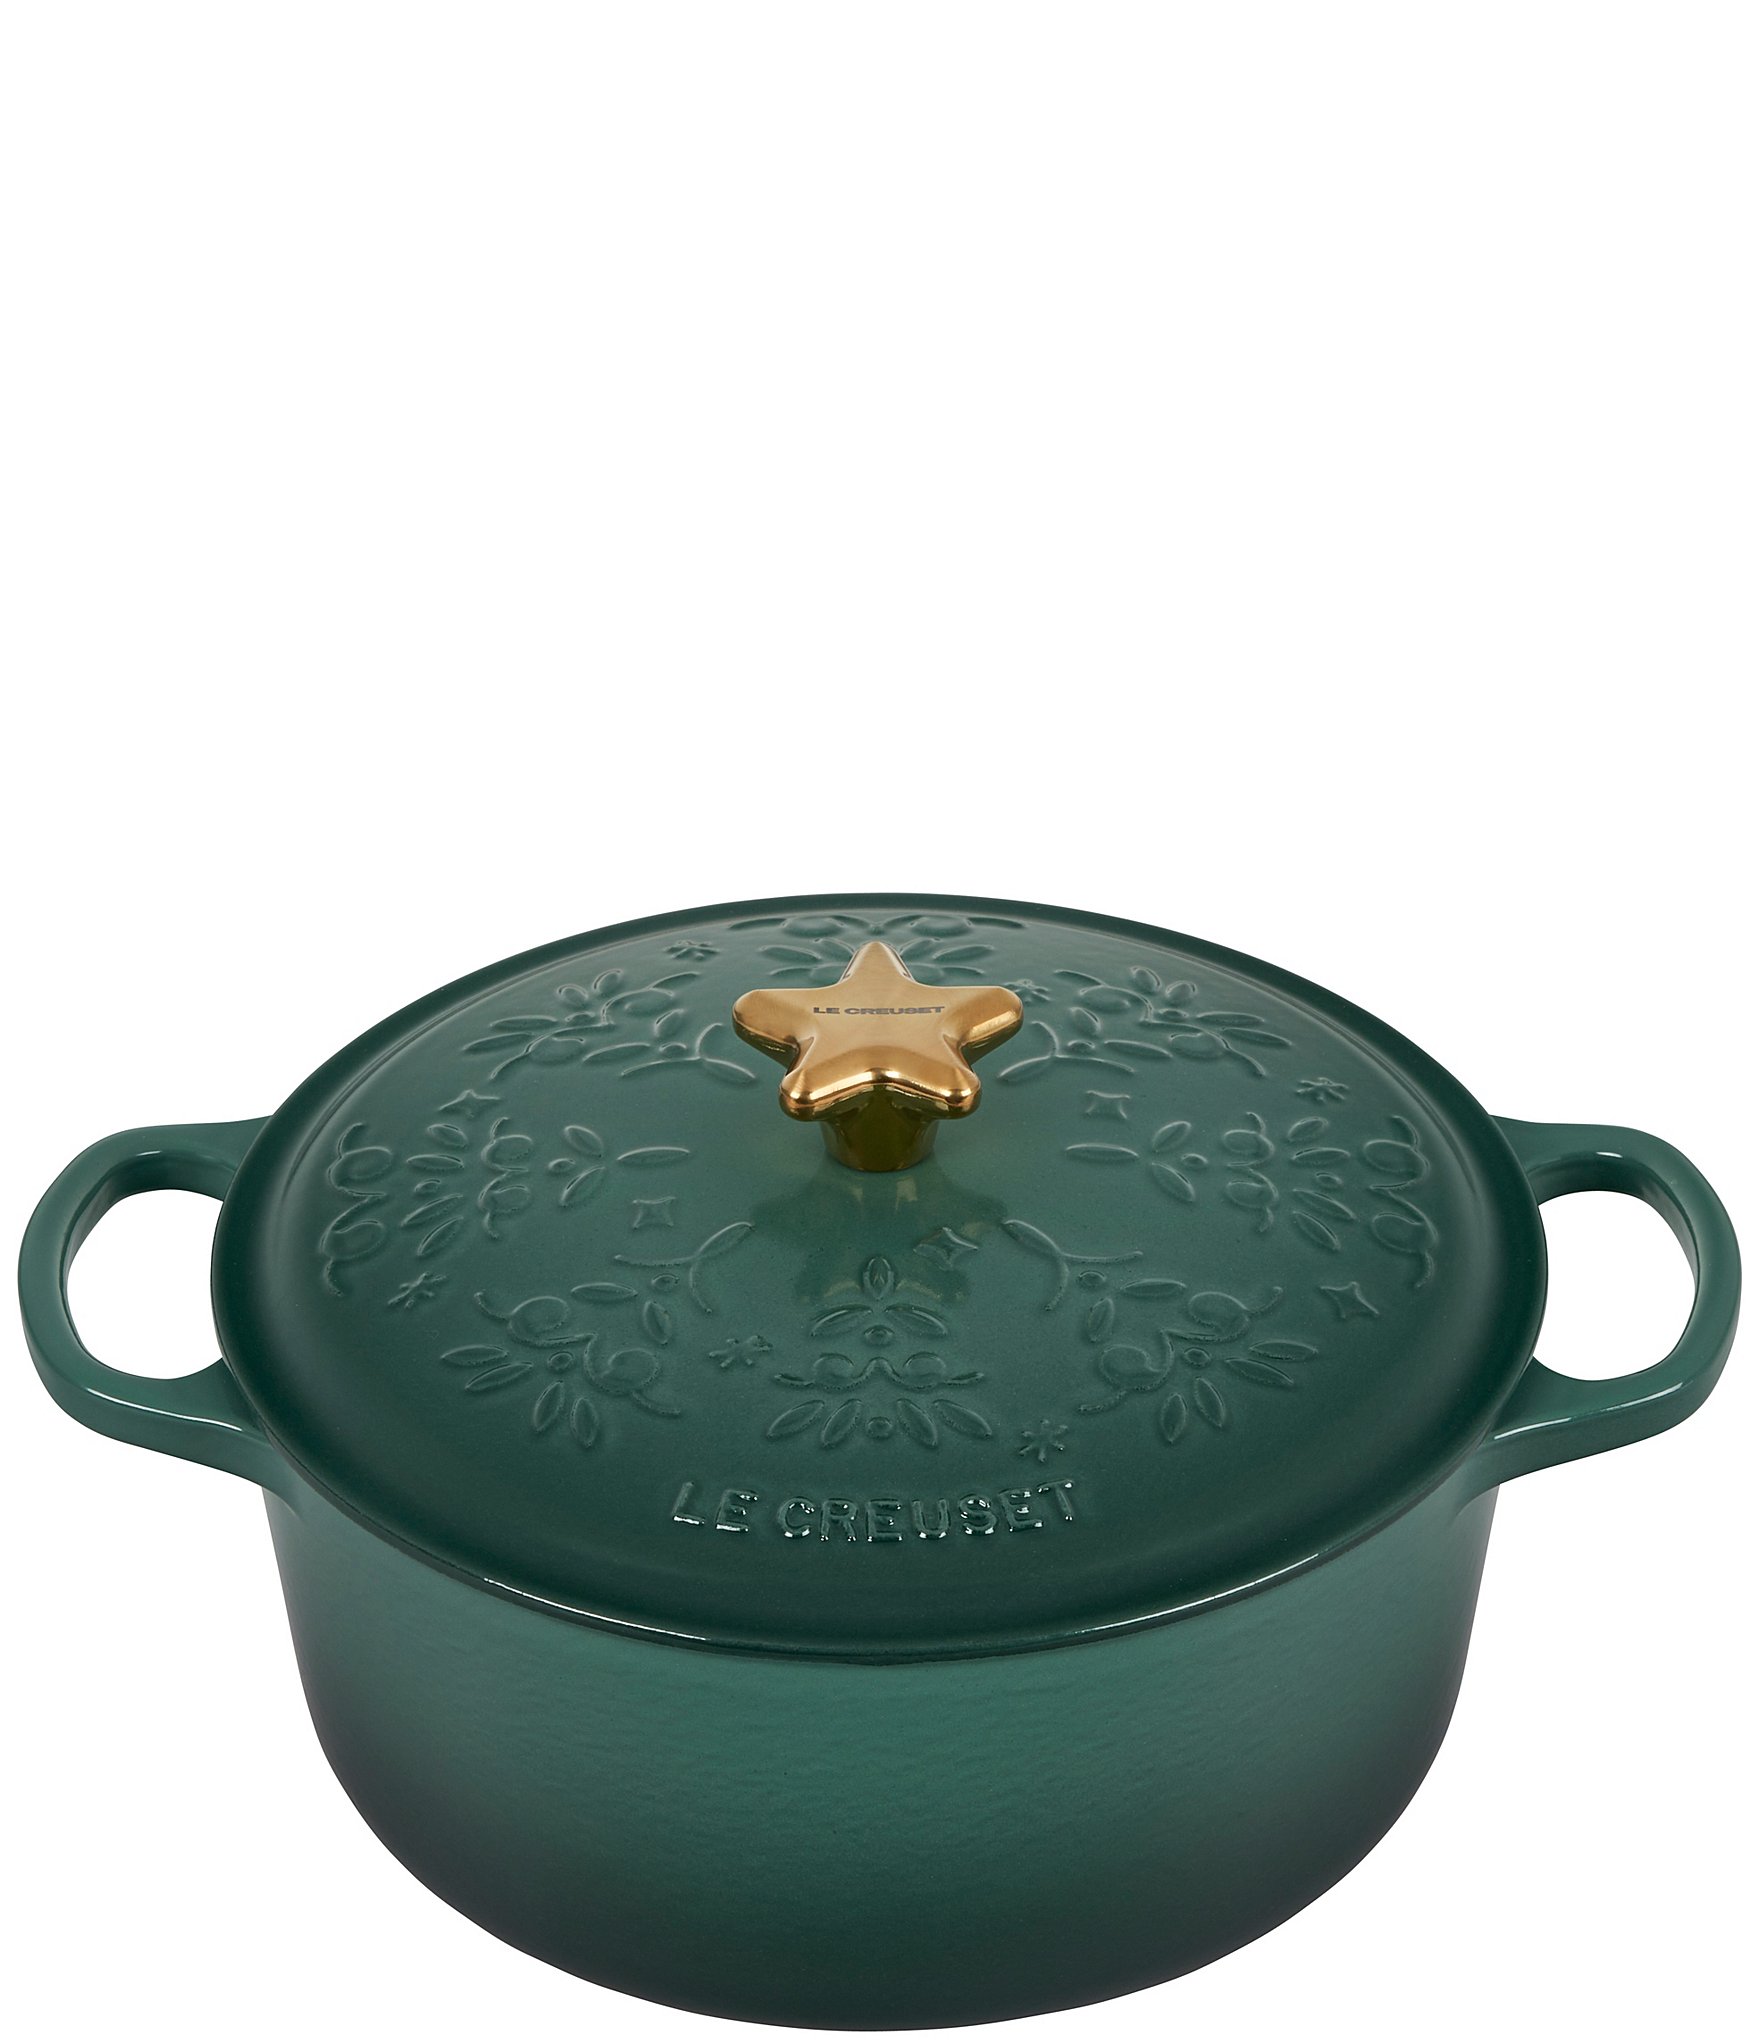 https://dimg.dillards.com/is/image/DillardsZoom/zoom/le-creuset-noel-collection-holiday-tree-round-dutch-oven/00000000_zi_1c473a95-7644-4621-b792-4a04fff0cd29.jpg